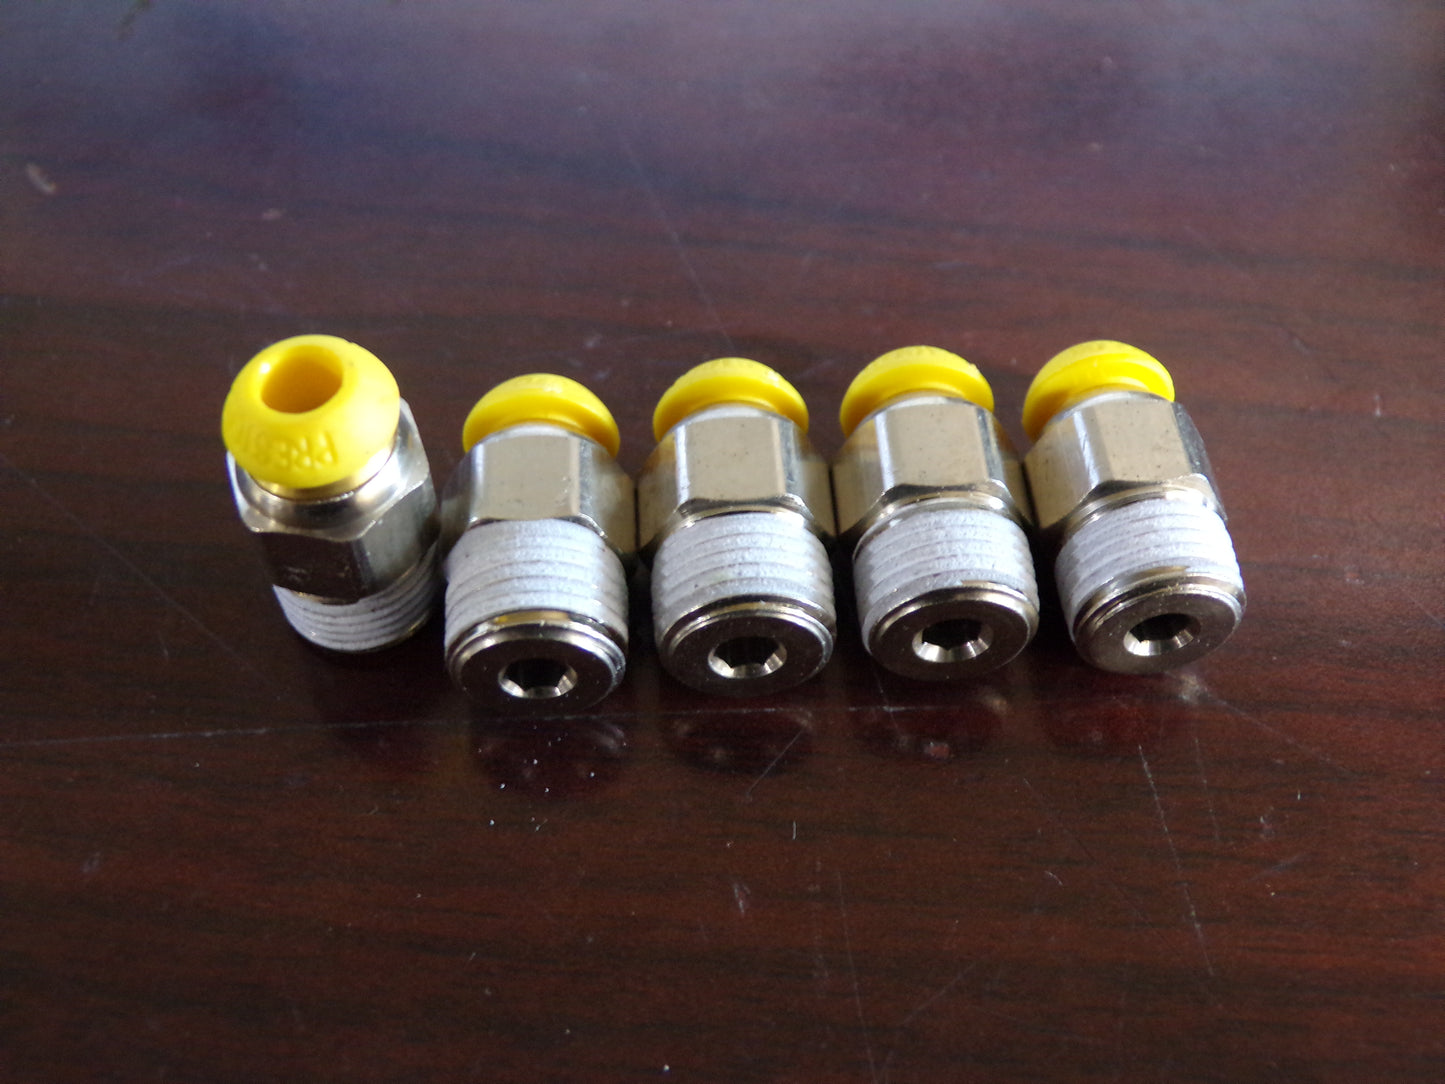 ADAPTER, TUBE TO PIPE, 4 MM, PUSH-IN, 1/8", BSPT, BRASS, ,METRIC PUSHLOK MALE CONNECTOR (CR00509-WTA12)